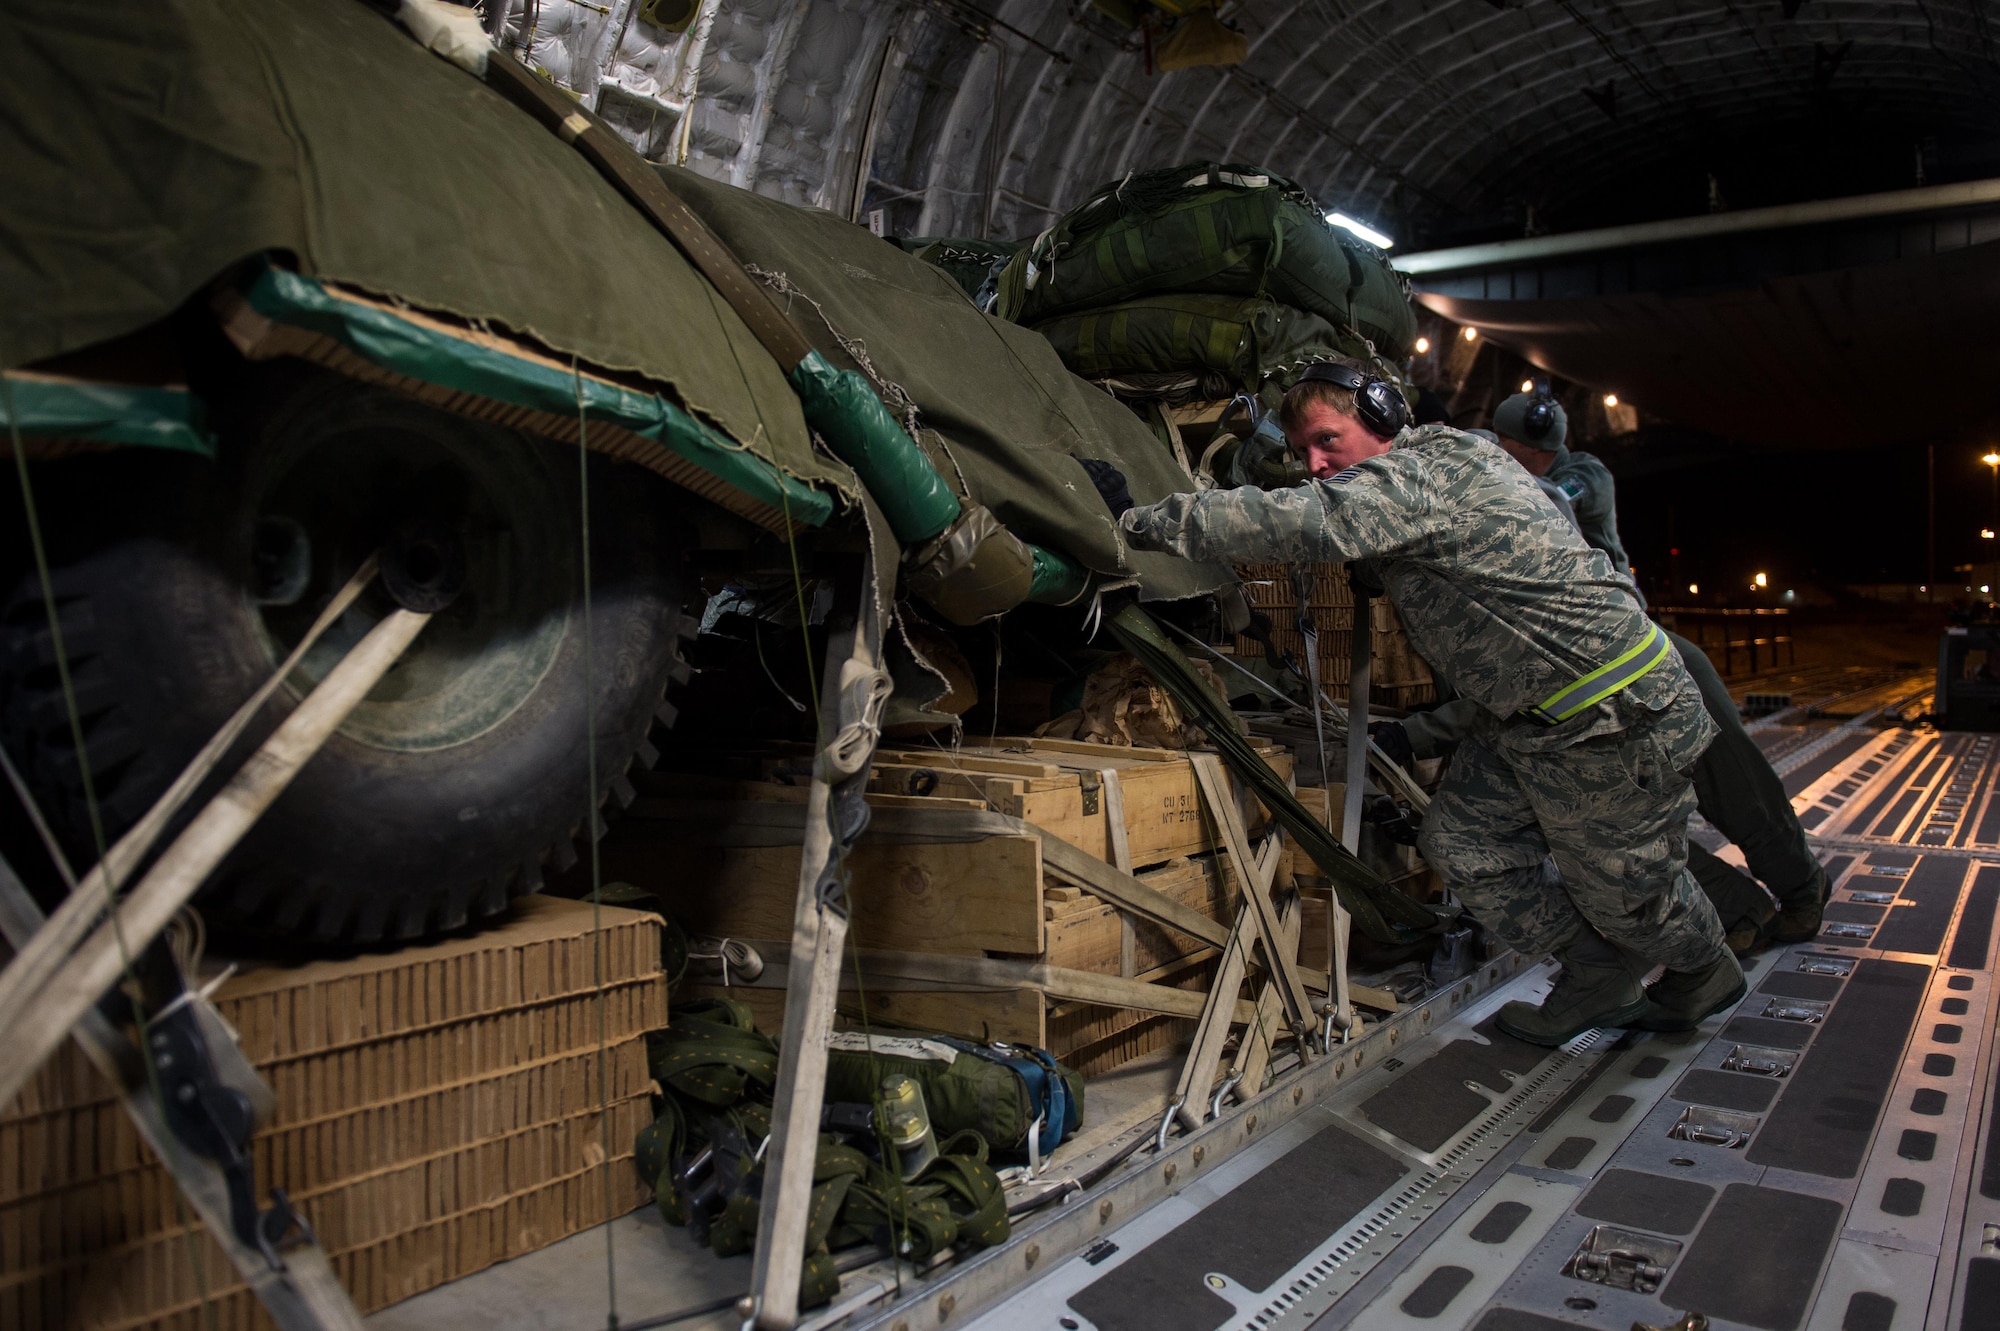 U.S. Air Force Staff Sgt. Andrew Ammerman, 621st Contingency Response Support Squadron aerial port specialist loads a pallet onto a C-17 Globemaster III aircraft during exercise RED FLAG-Alaska at Joint Base Elmendorf-Richardson, Alaska, Oct. 11, 2016. RF-A is a series of Pacific Air Forces commander-directed field training exercises for U.S. and partner nation forces, providing combined offensive counter-air, interdiction, close air support, and large force employment training in a simulated combat environment. (U.S. Air Force photo by Master Sgt. Joseph Swafford)